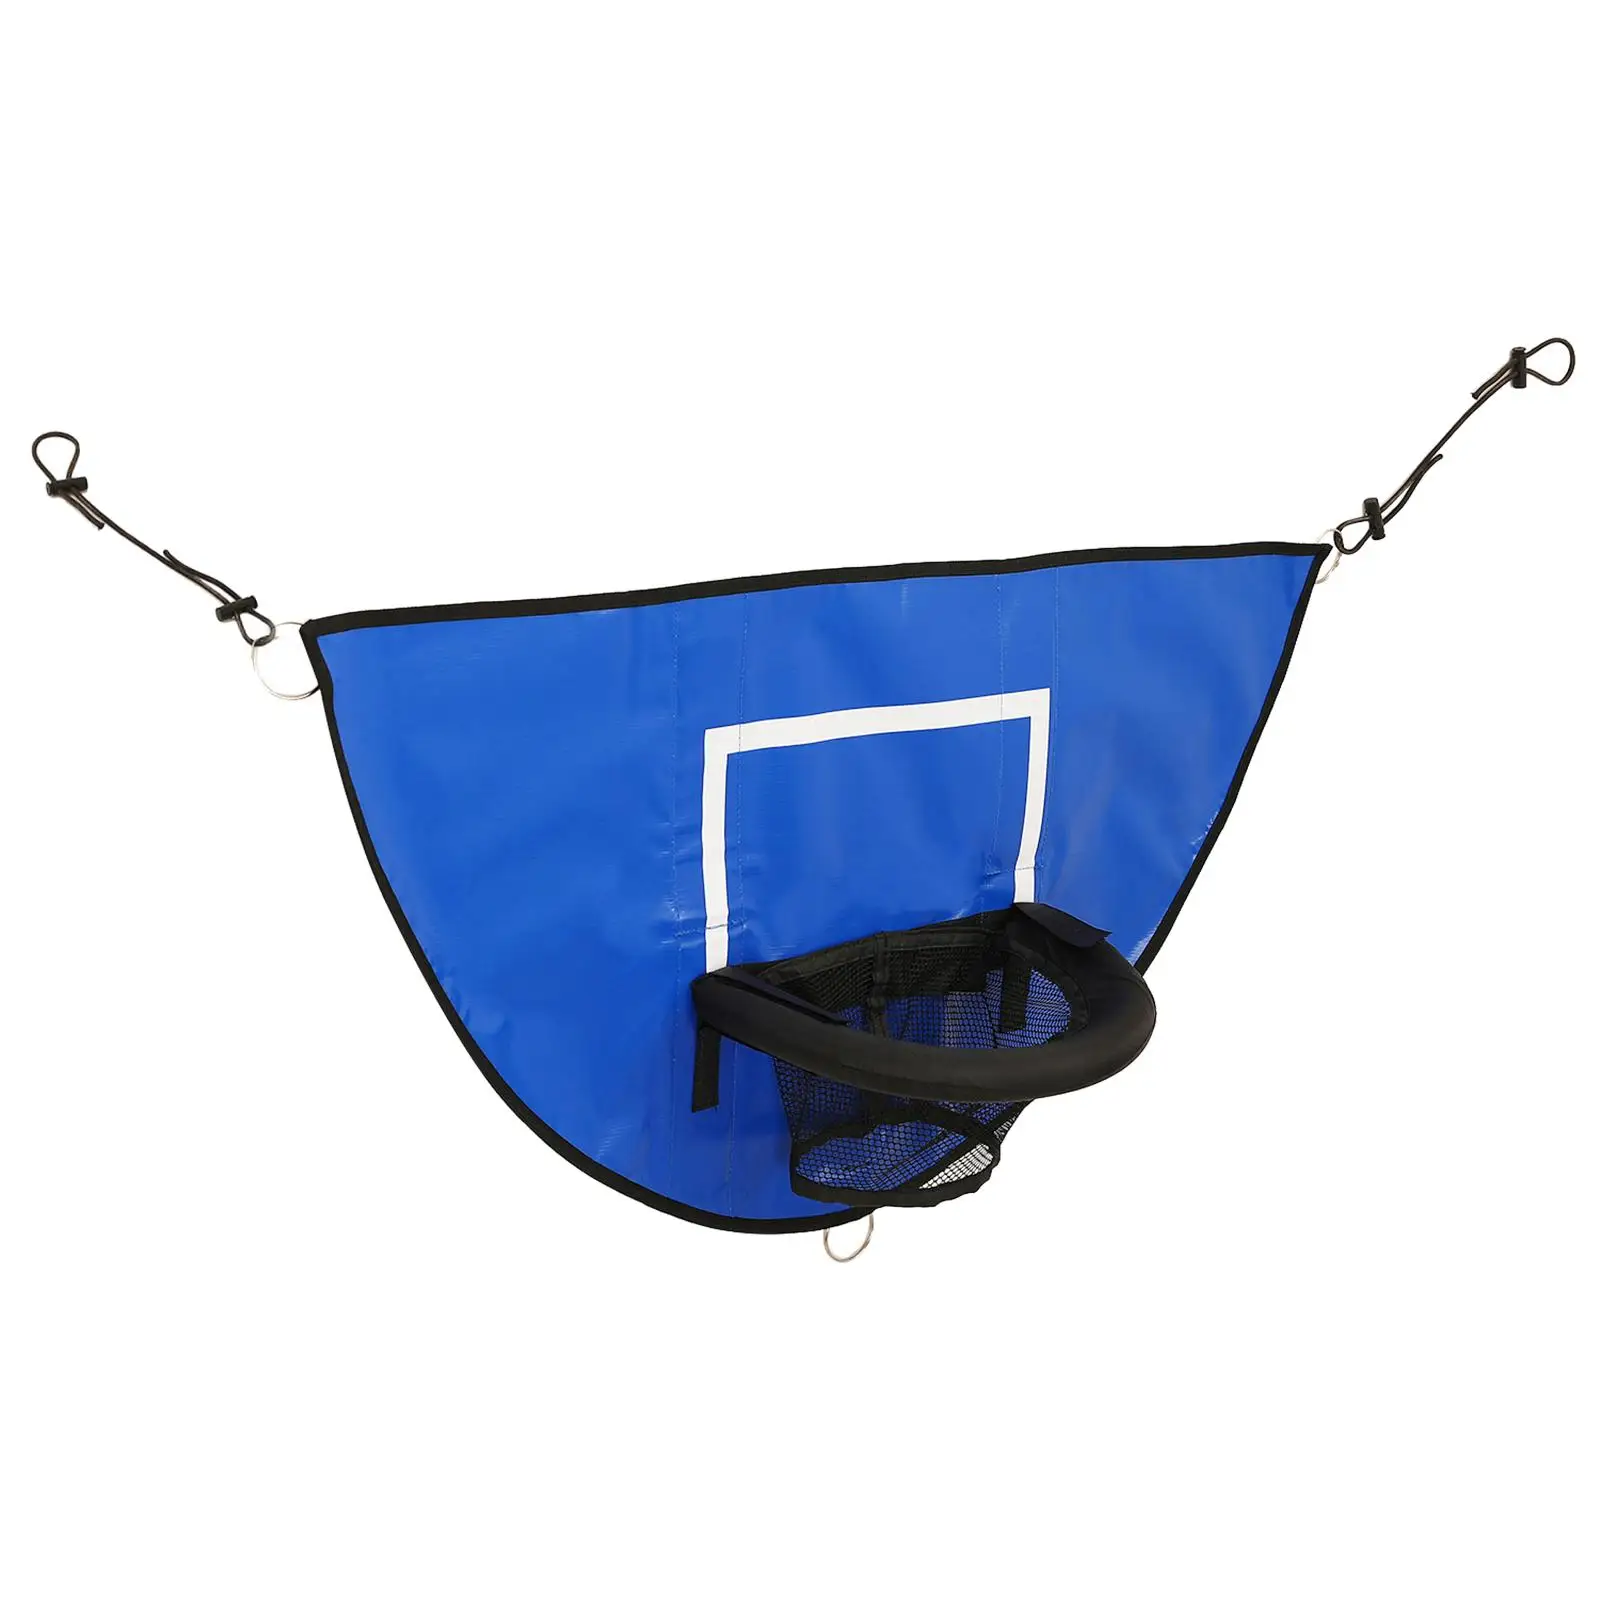 Basketball Hoop Attachment for Trampoline Basketball Training Basketball Toy Universal Baseboard for Kids Boys Girls Dunking